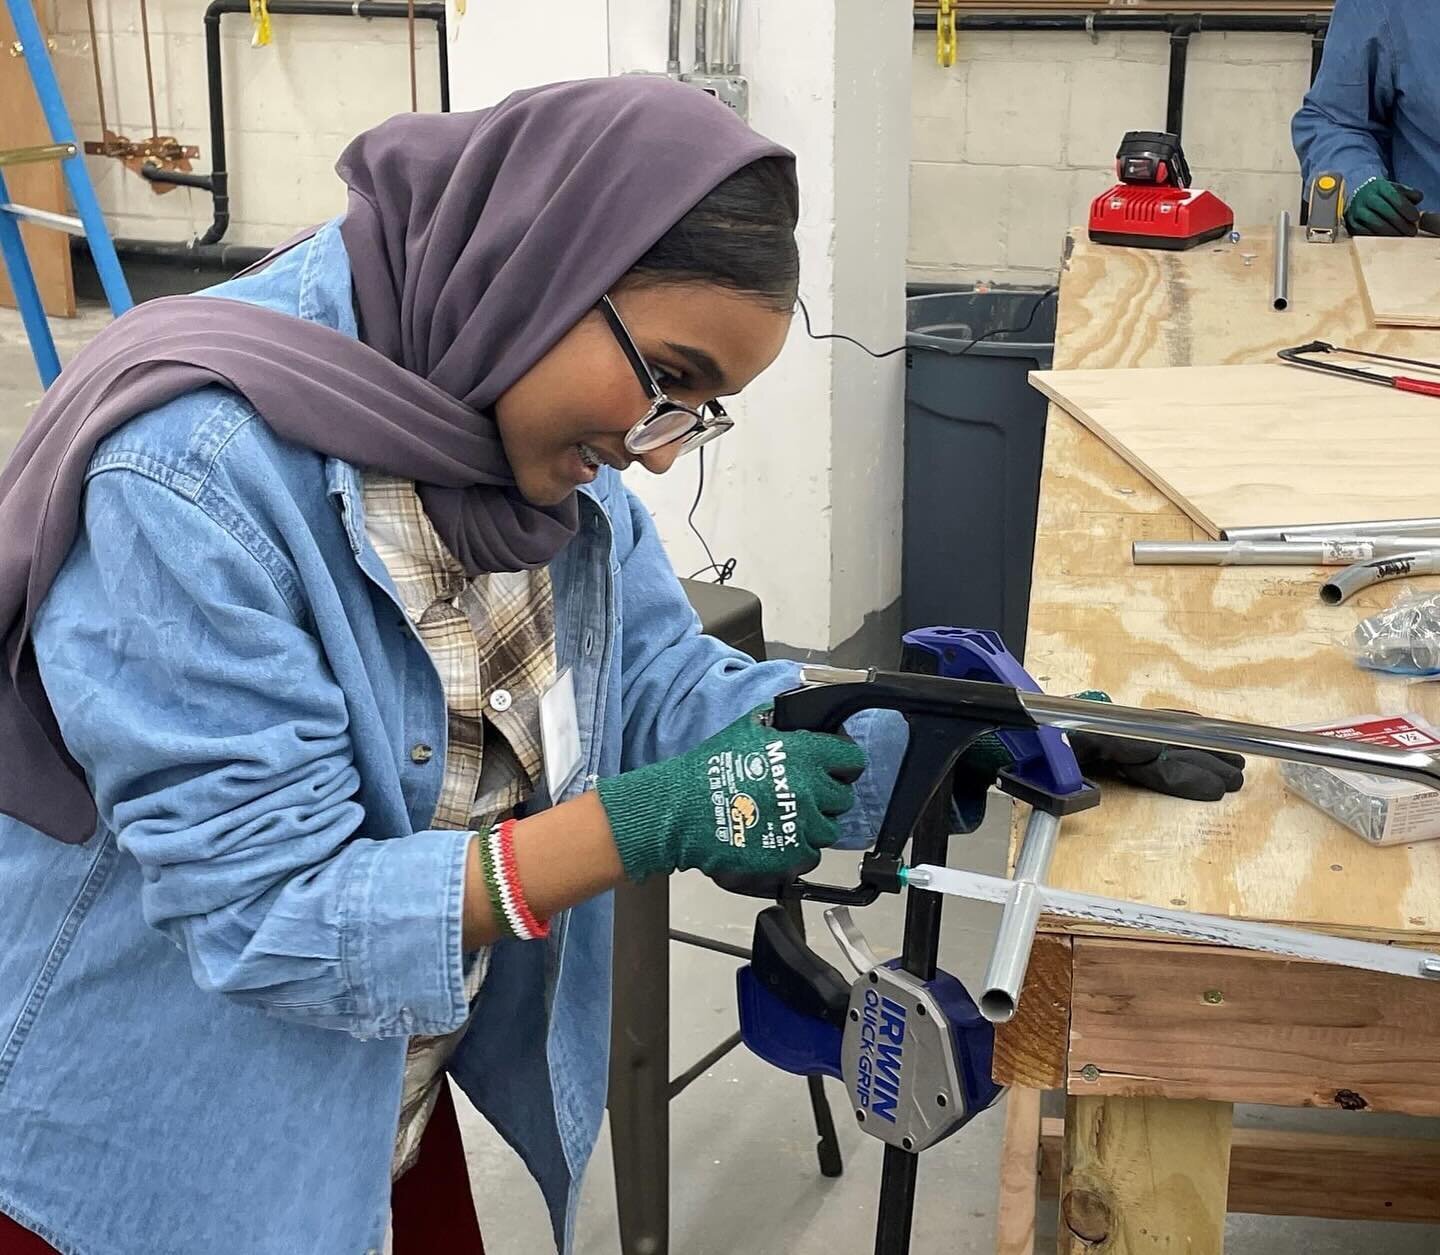 This week we celebrated the Grand Re-Opening of our newest program, @lakestreetworks!

This 10-month workforce development program, comes alongside high school seniors by training them in life skills as well as construction-related careers.

Students